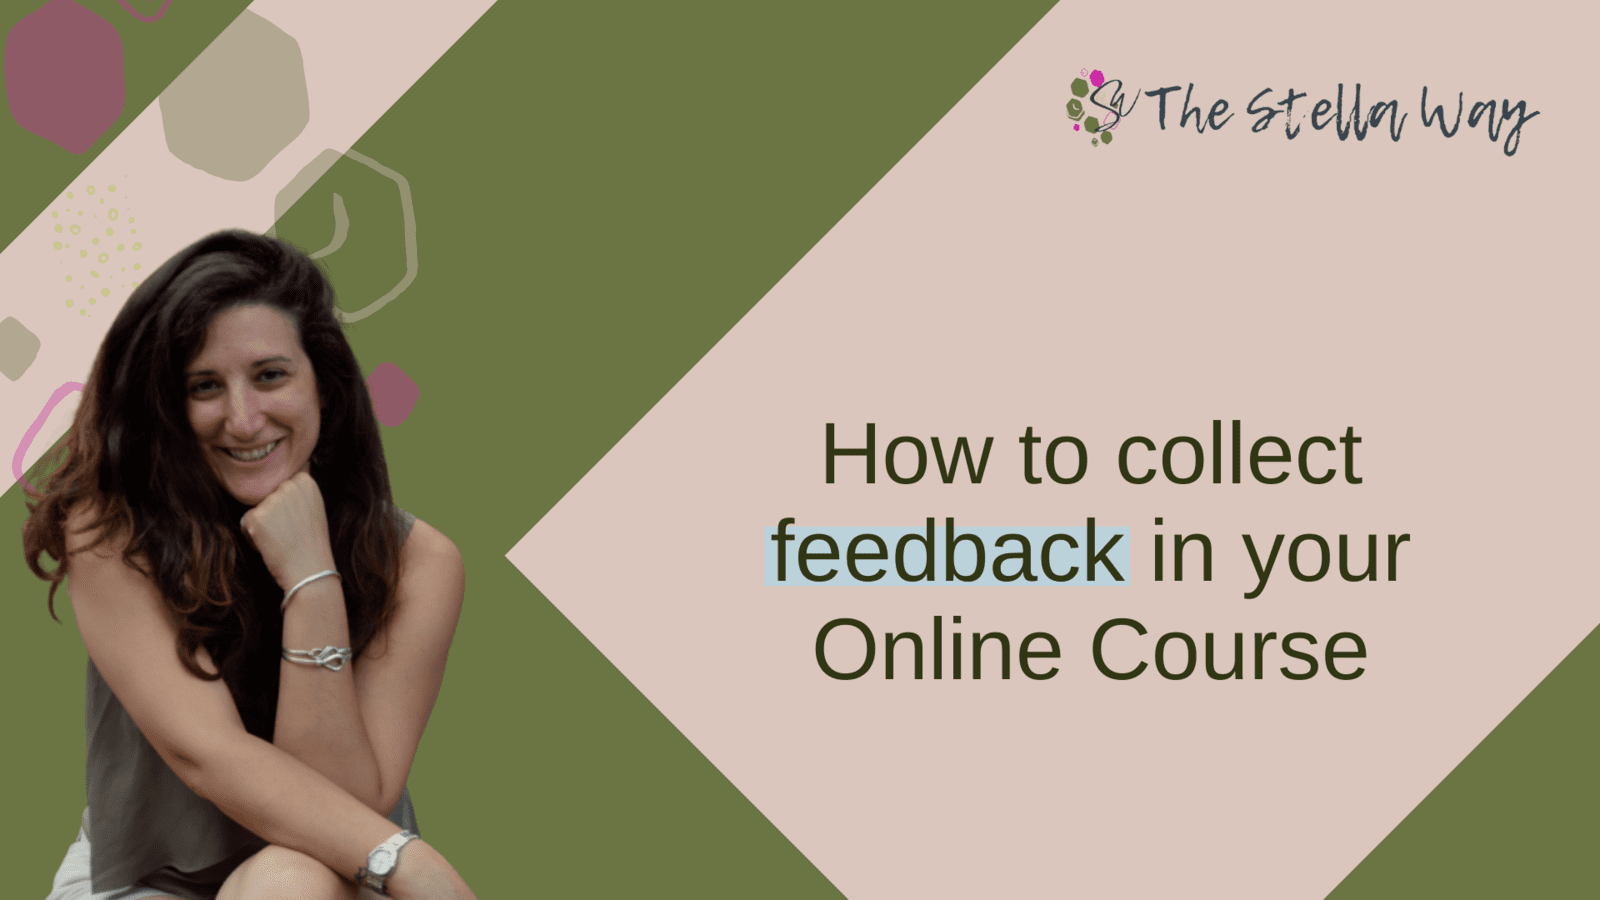 How to collect feedback from your students in an online course